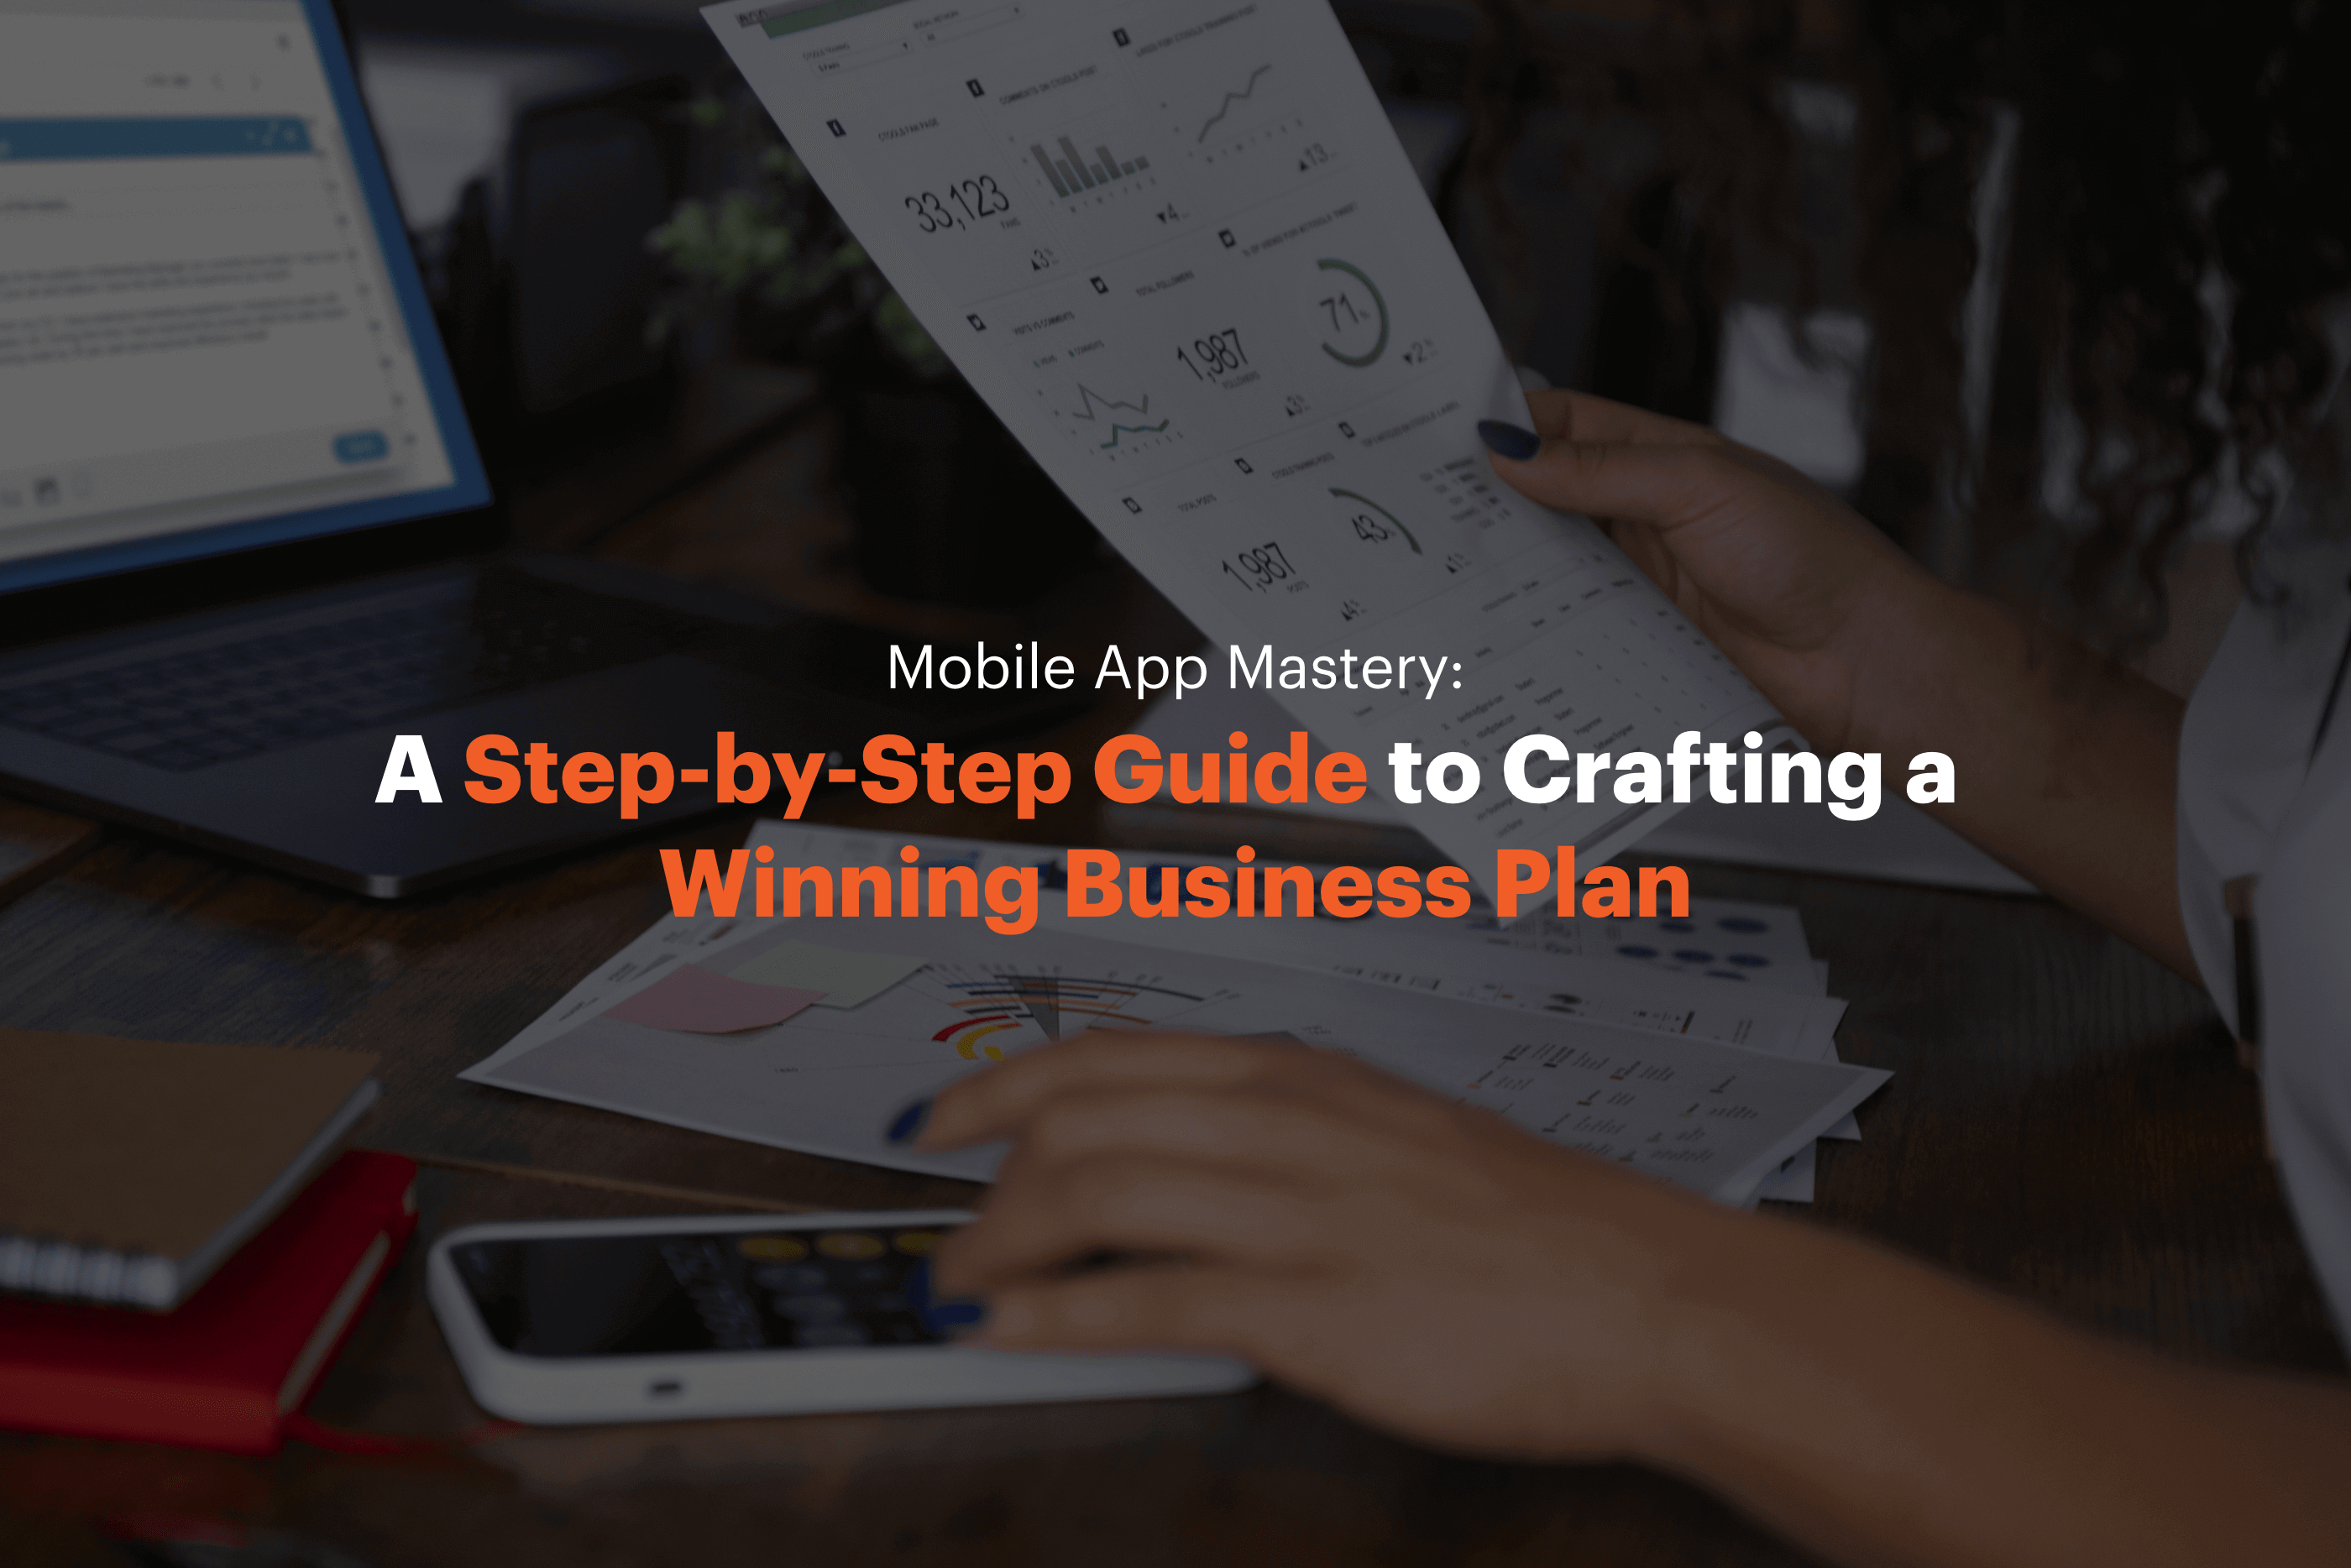 Mobile App Mastery: A Step-by-Step Guide to Crafting a Winning Business Plan